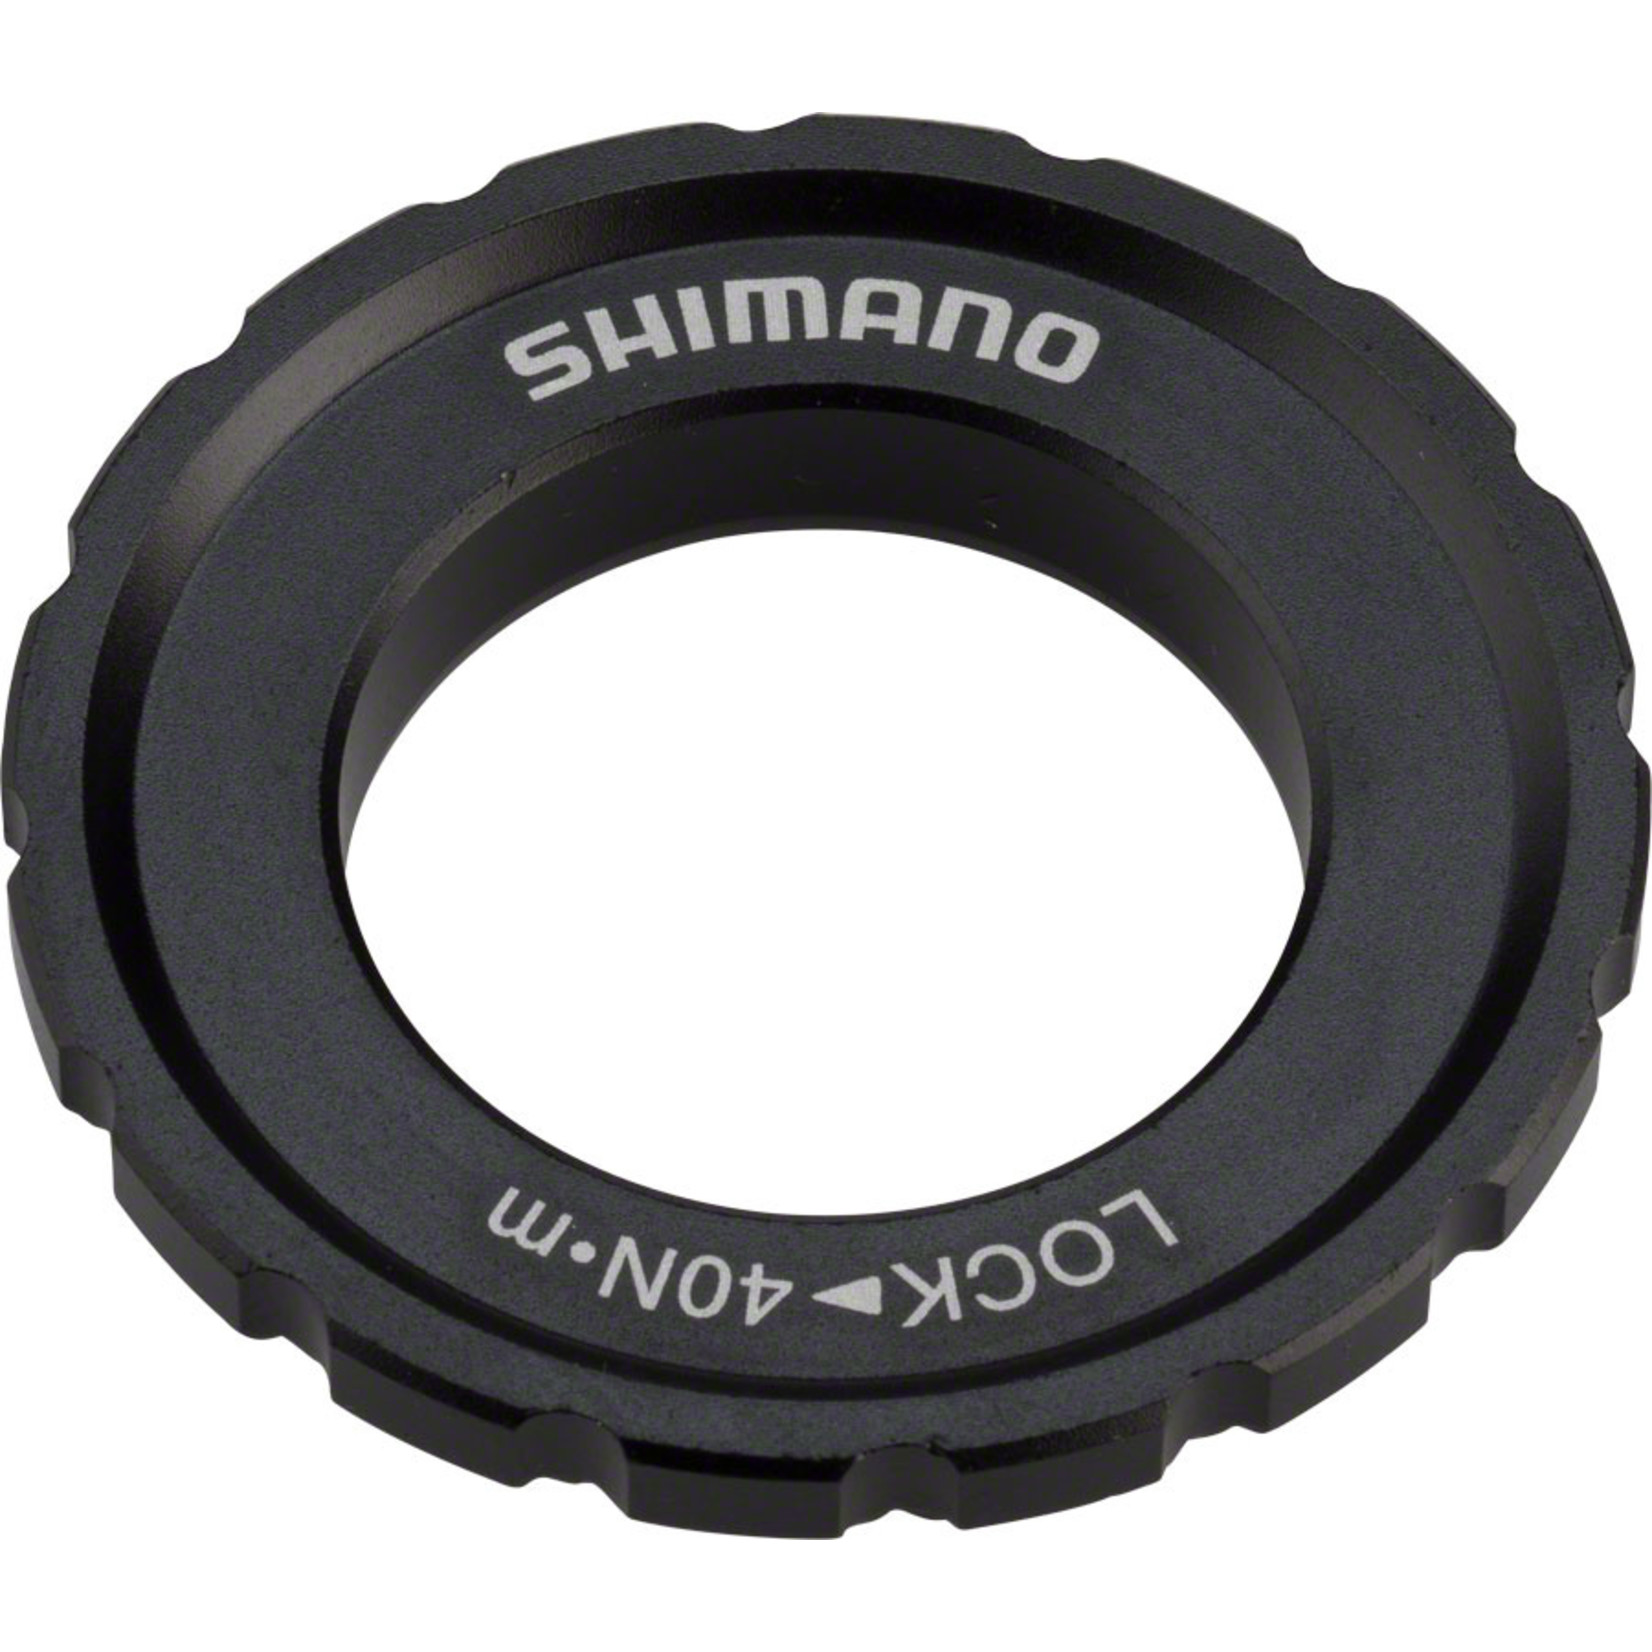 Shimano Shimano XT M8010 Outer Serration Centerlock Disc Rotor Lockring for use with 12/15/20mm Axle Hubs